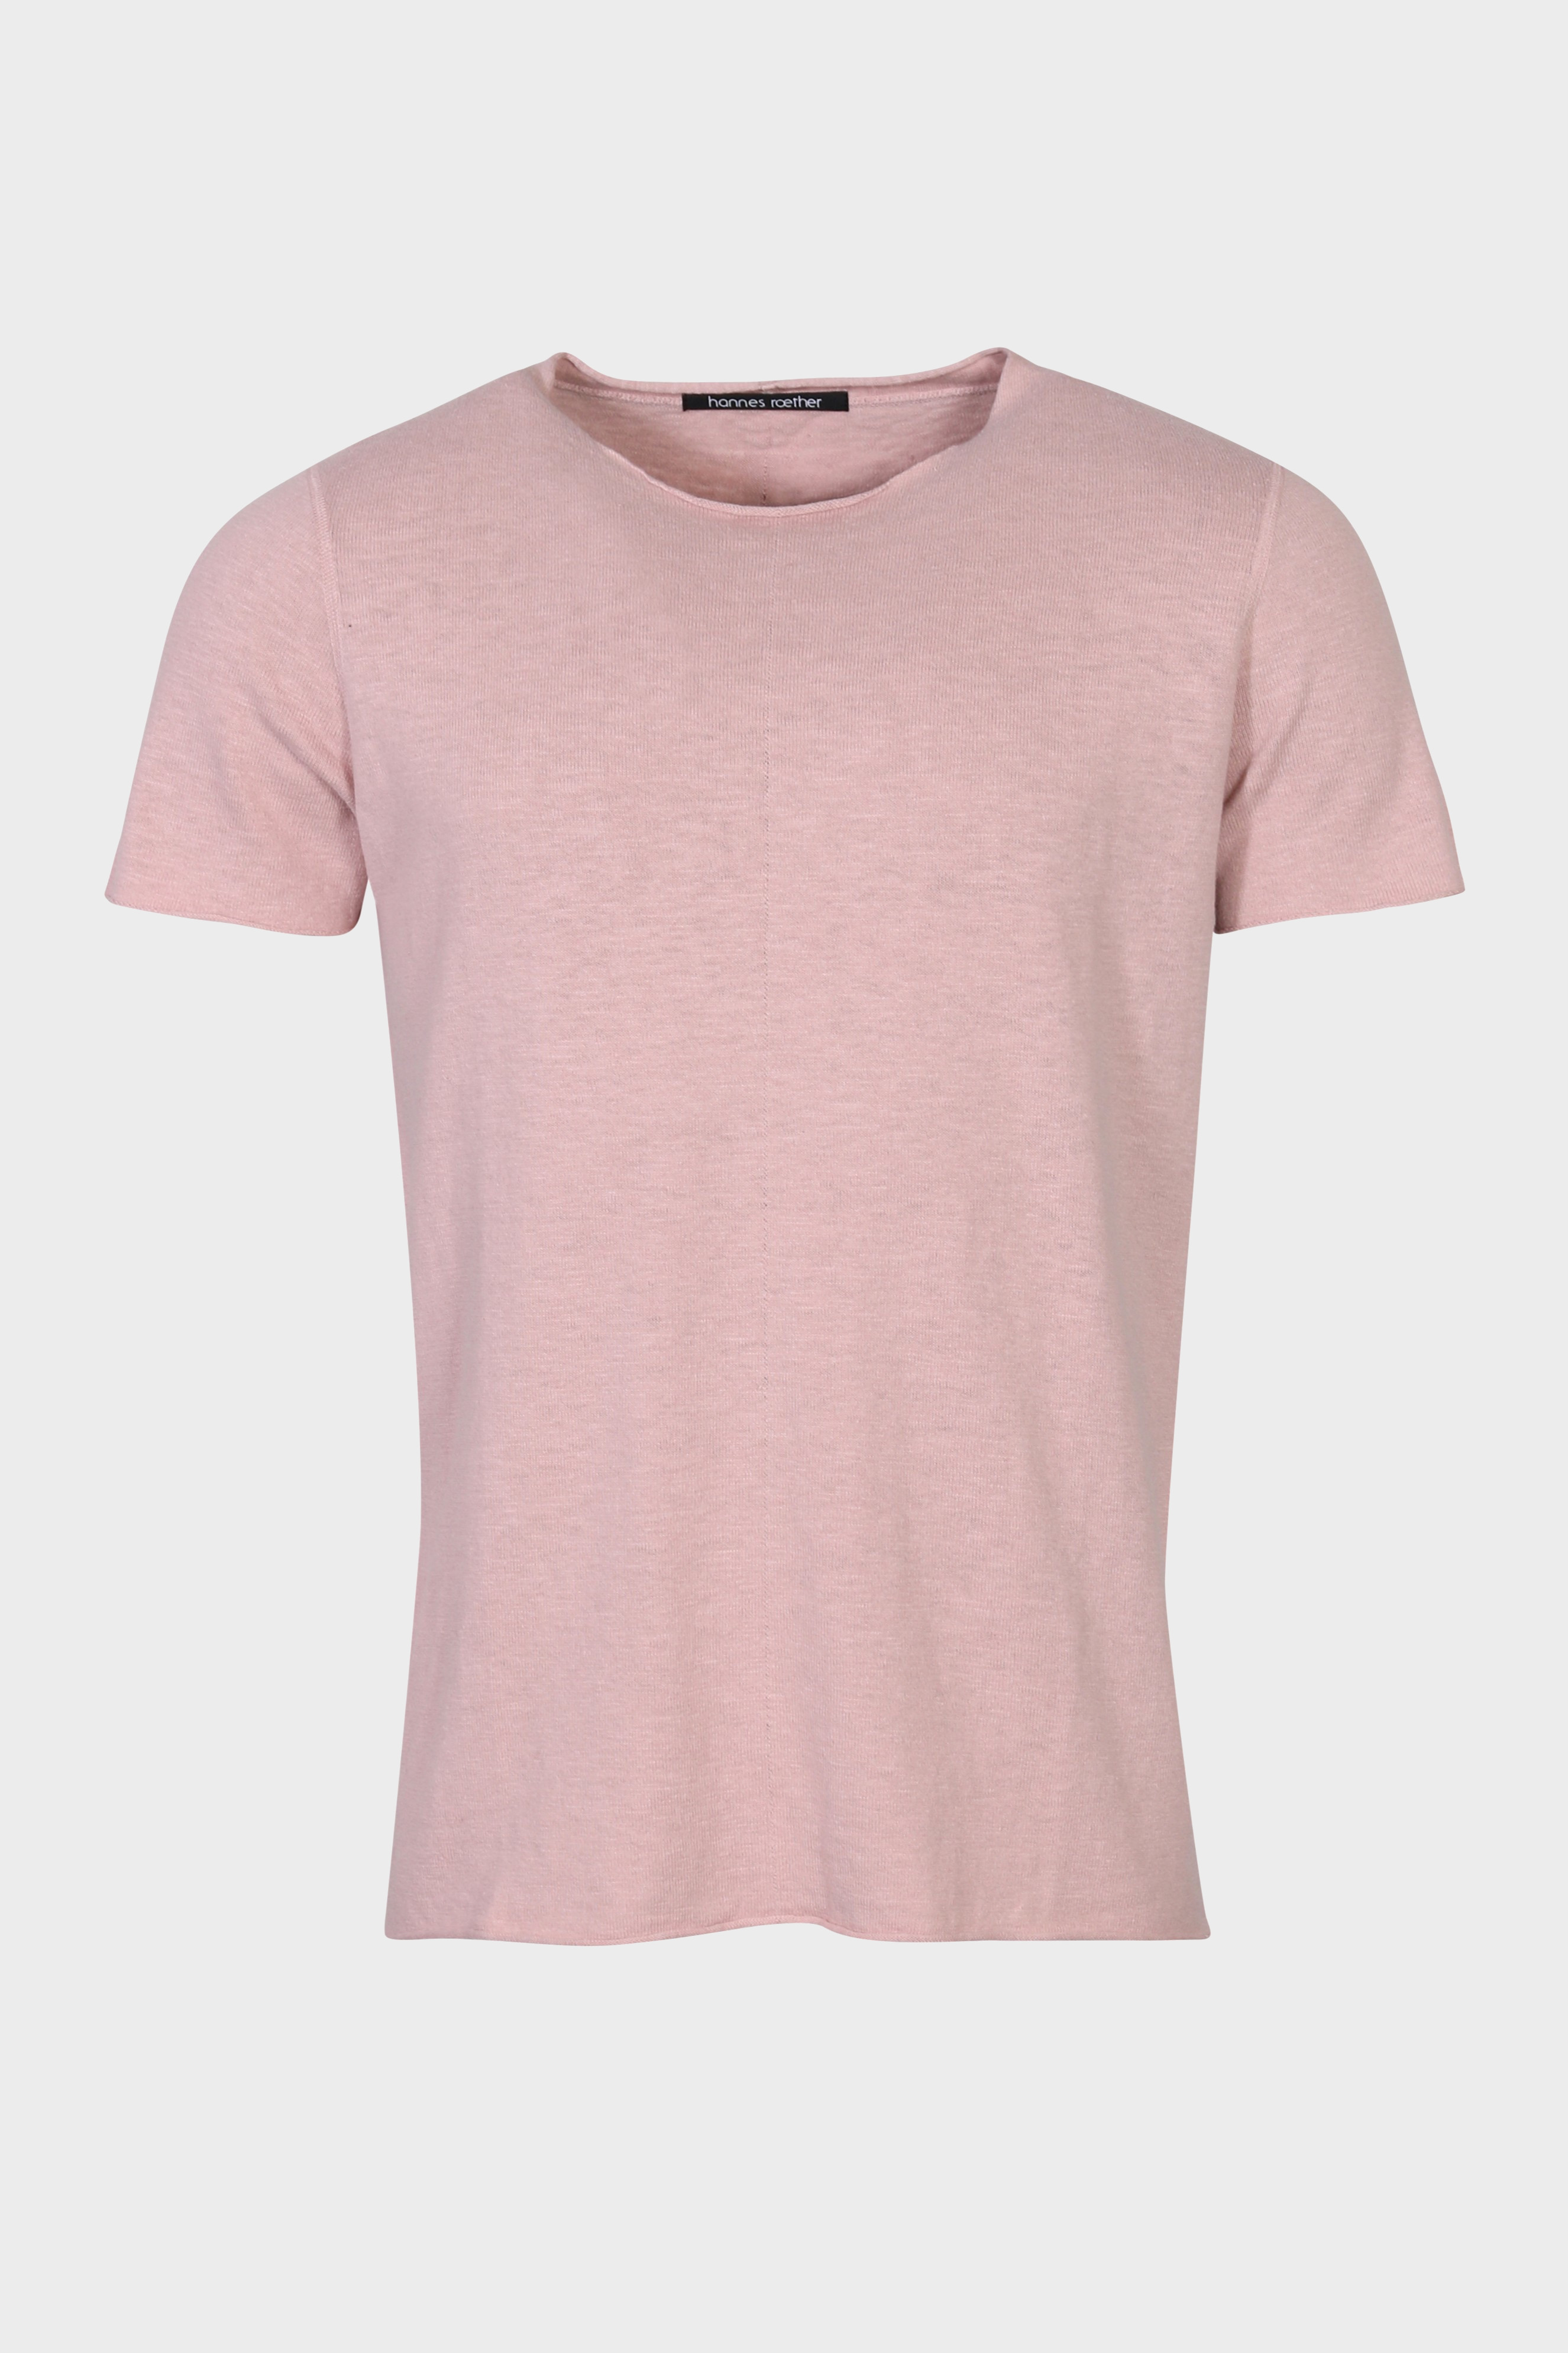 HANNES ROETHER Knit T-Shirt in Light Pink L